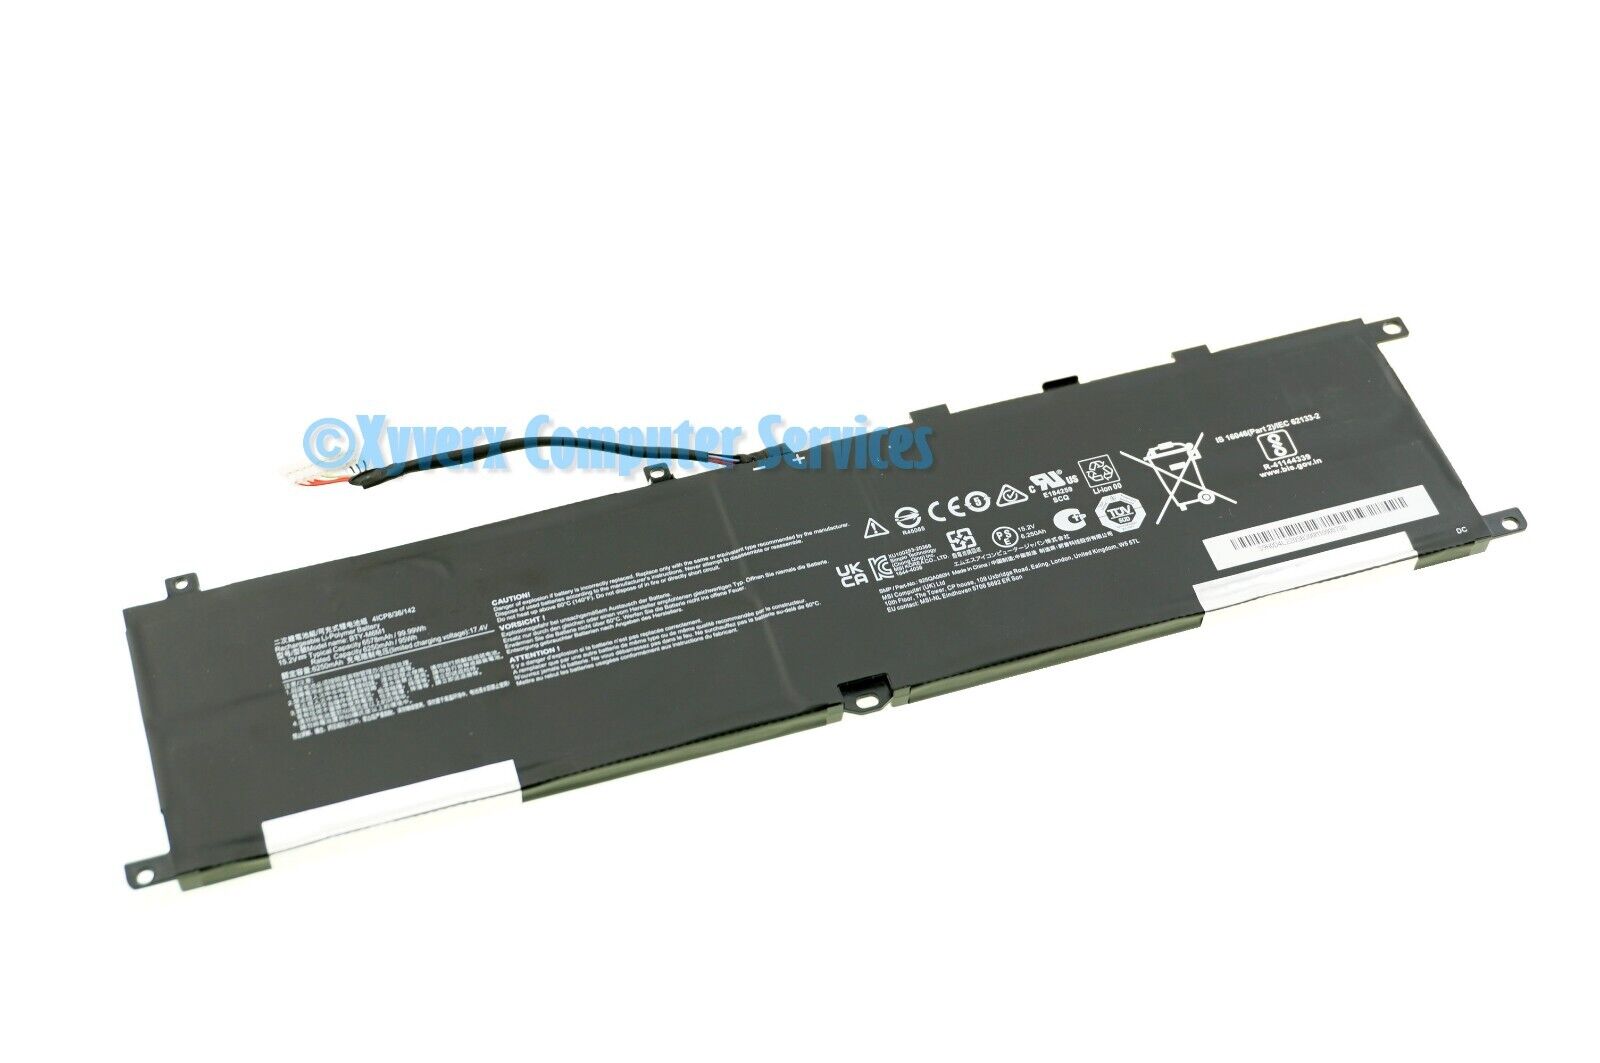 S9N0D4L220 BTY-M6M1 OEM MSI BATTERY 15.2V STEALTH GS77 MS-17P1 (GRD A)(DF12)